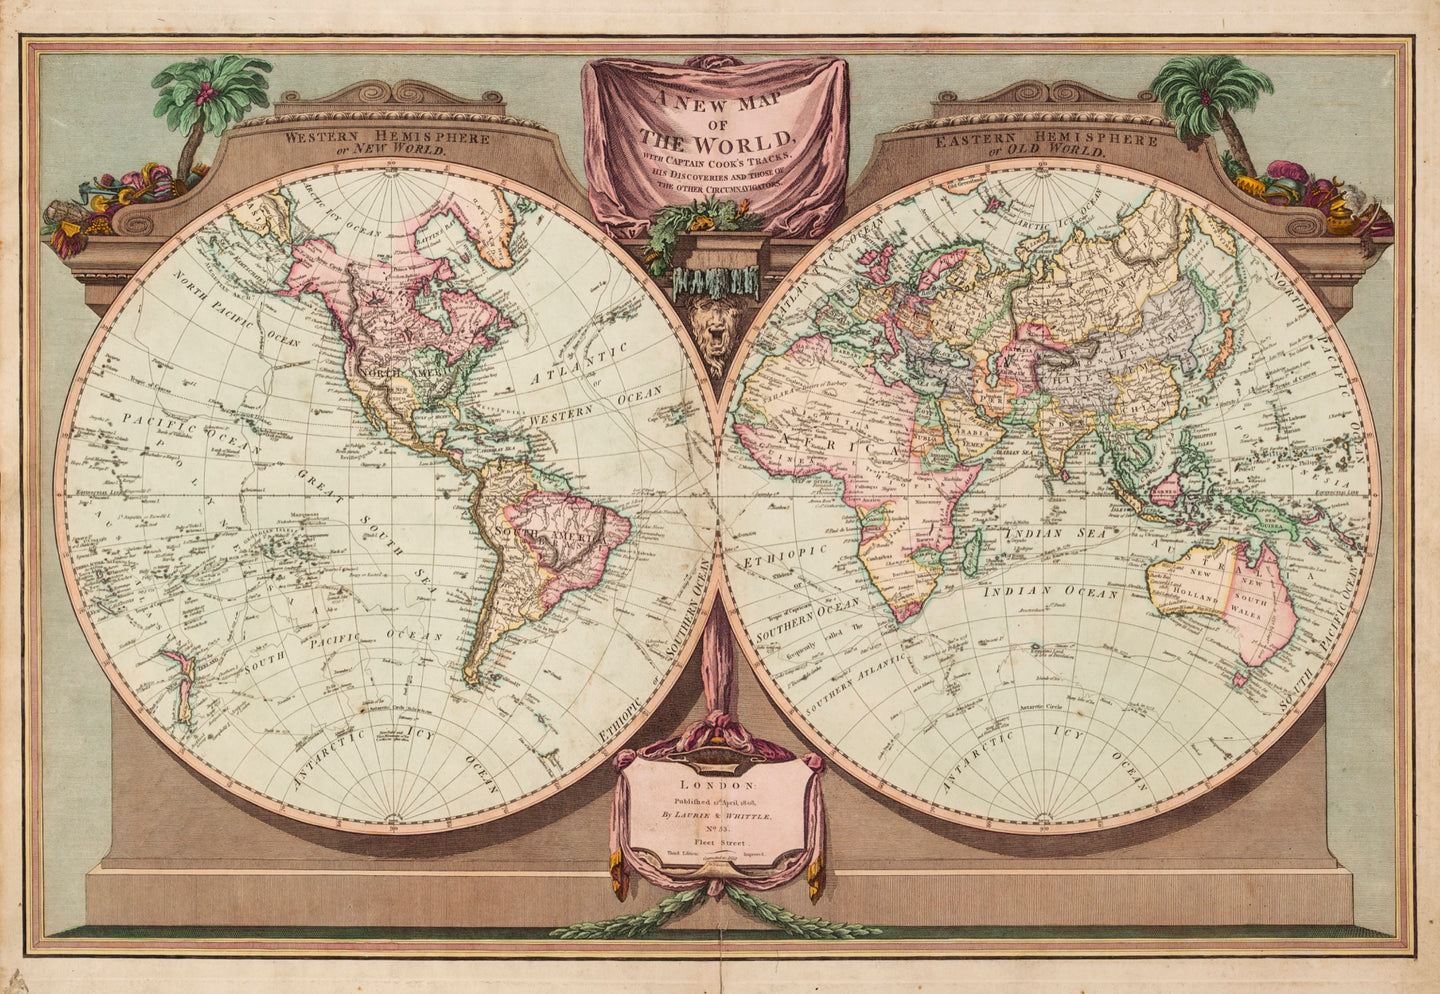 A new map of the world, with Captain Cook's tracks, his discoveries and those of the other circumnavigators